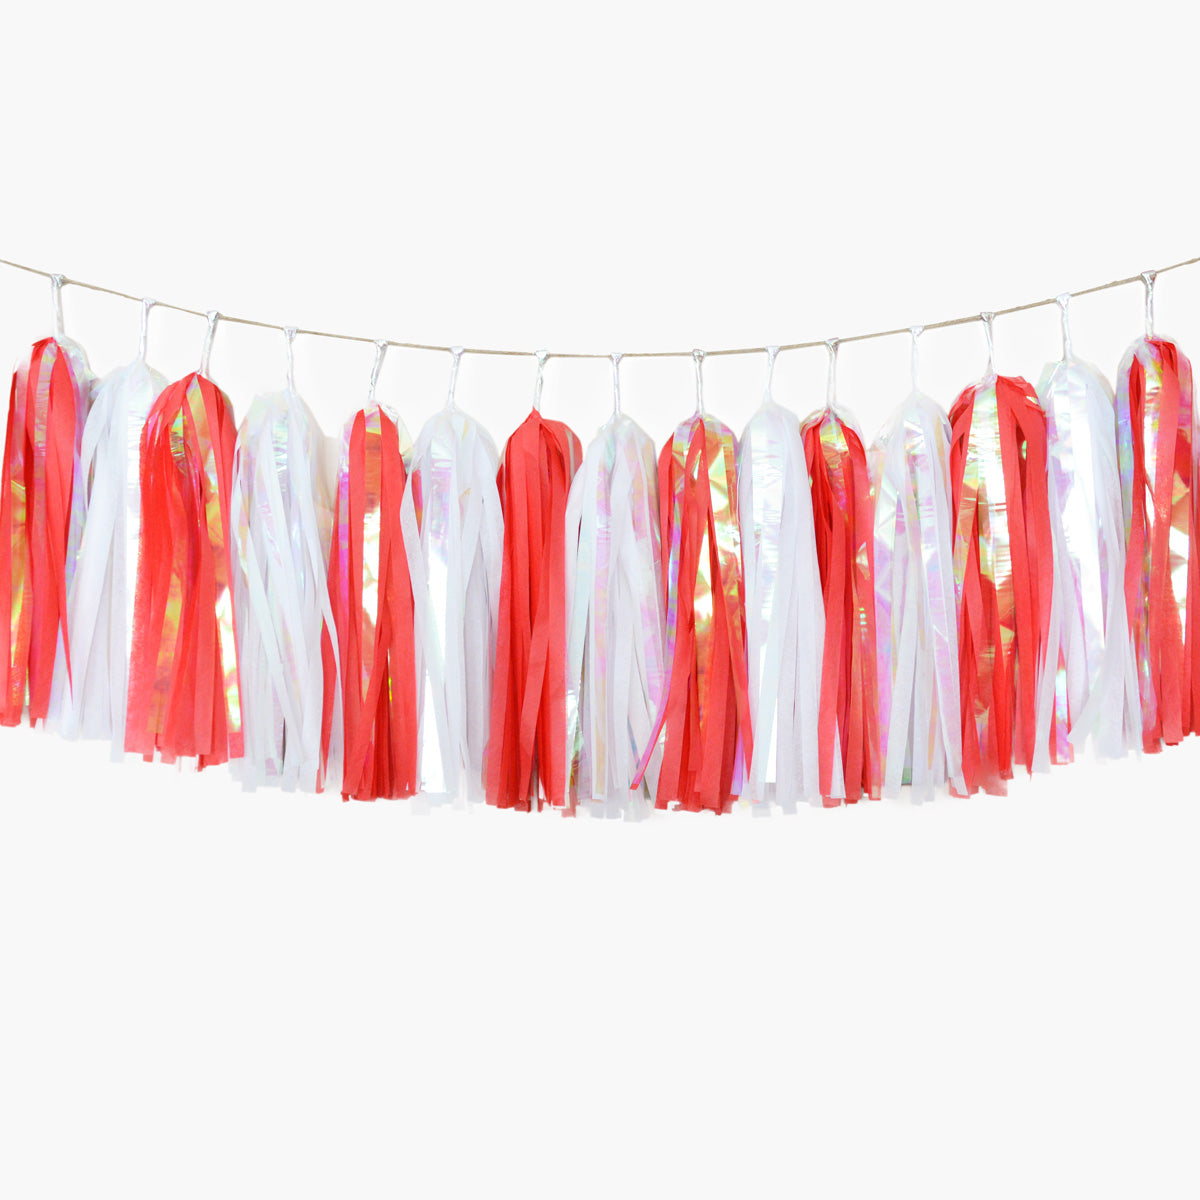 Classic Iridescent Red Peppermint Tassel Garland, Red Christmas Mantel Garland, Holiday Iridescent Decoration, Candy Cane Decor, Peppermint Swirl Decor GenWooShop